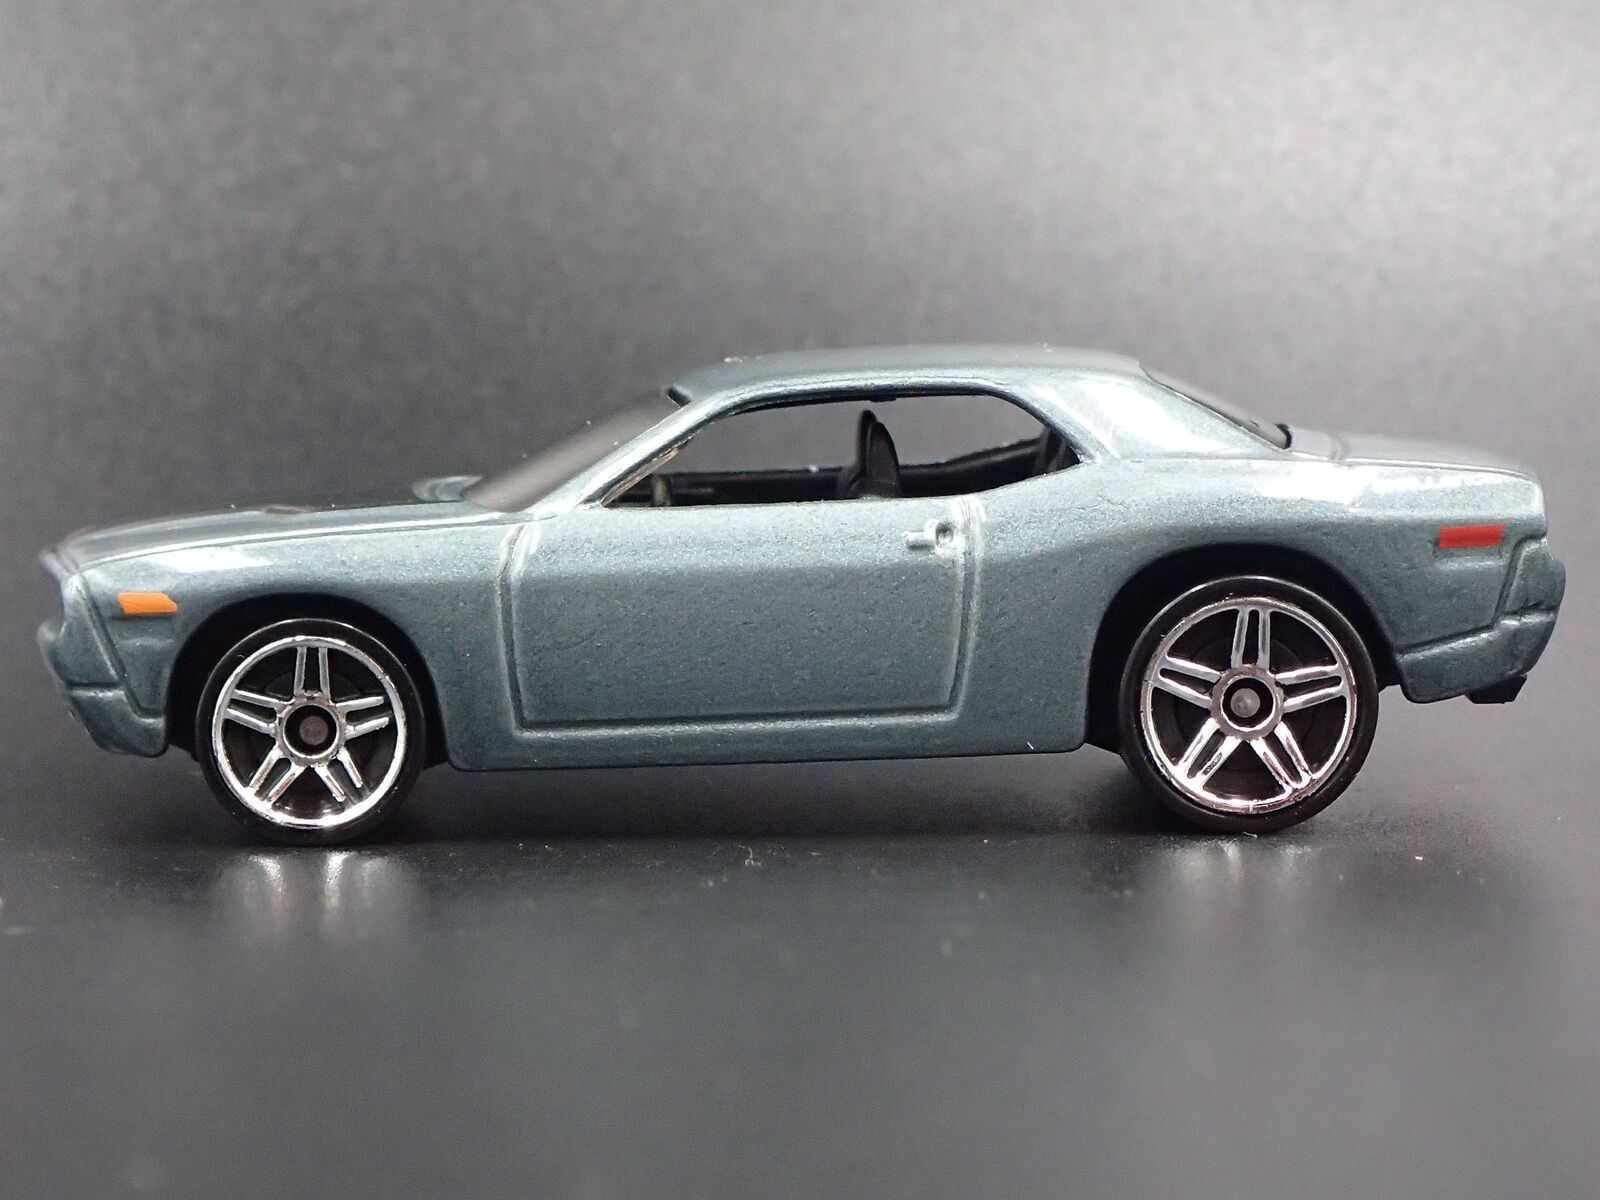 2008-2014 DODGE CHALLENGER RARE 1/64 SCALE COLLECTIBLE DIORAMA DIECAST MODEL CAR